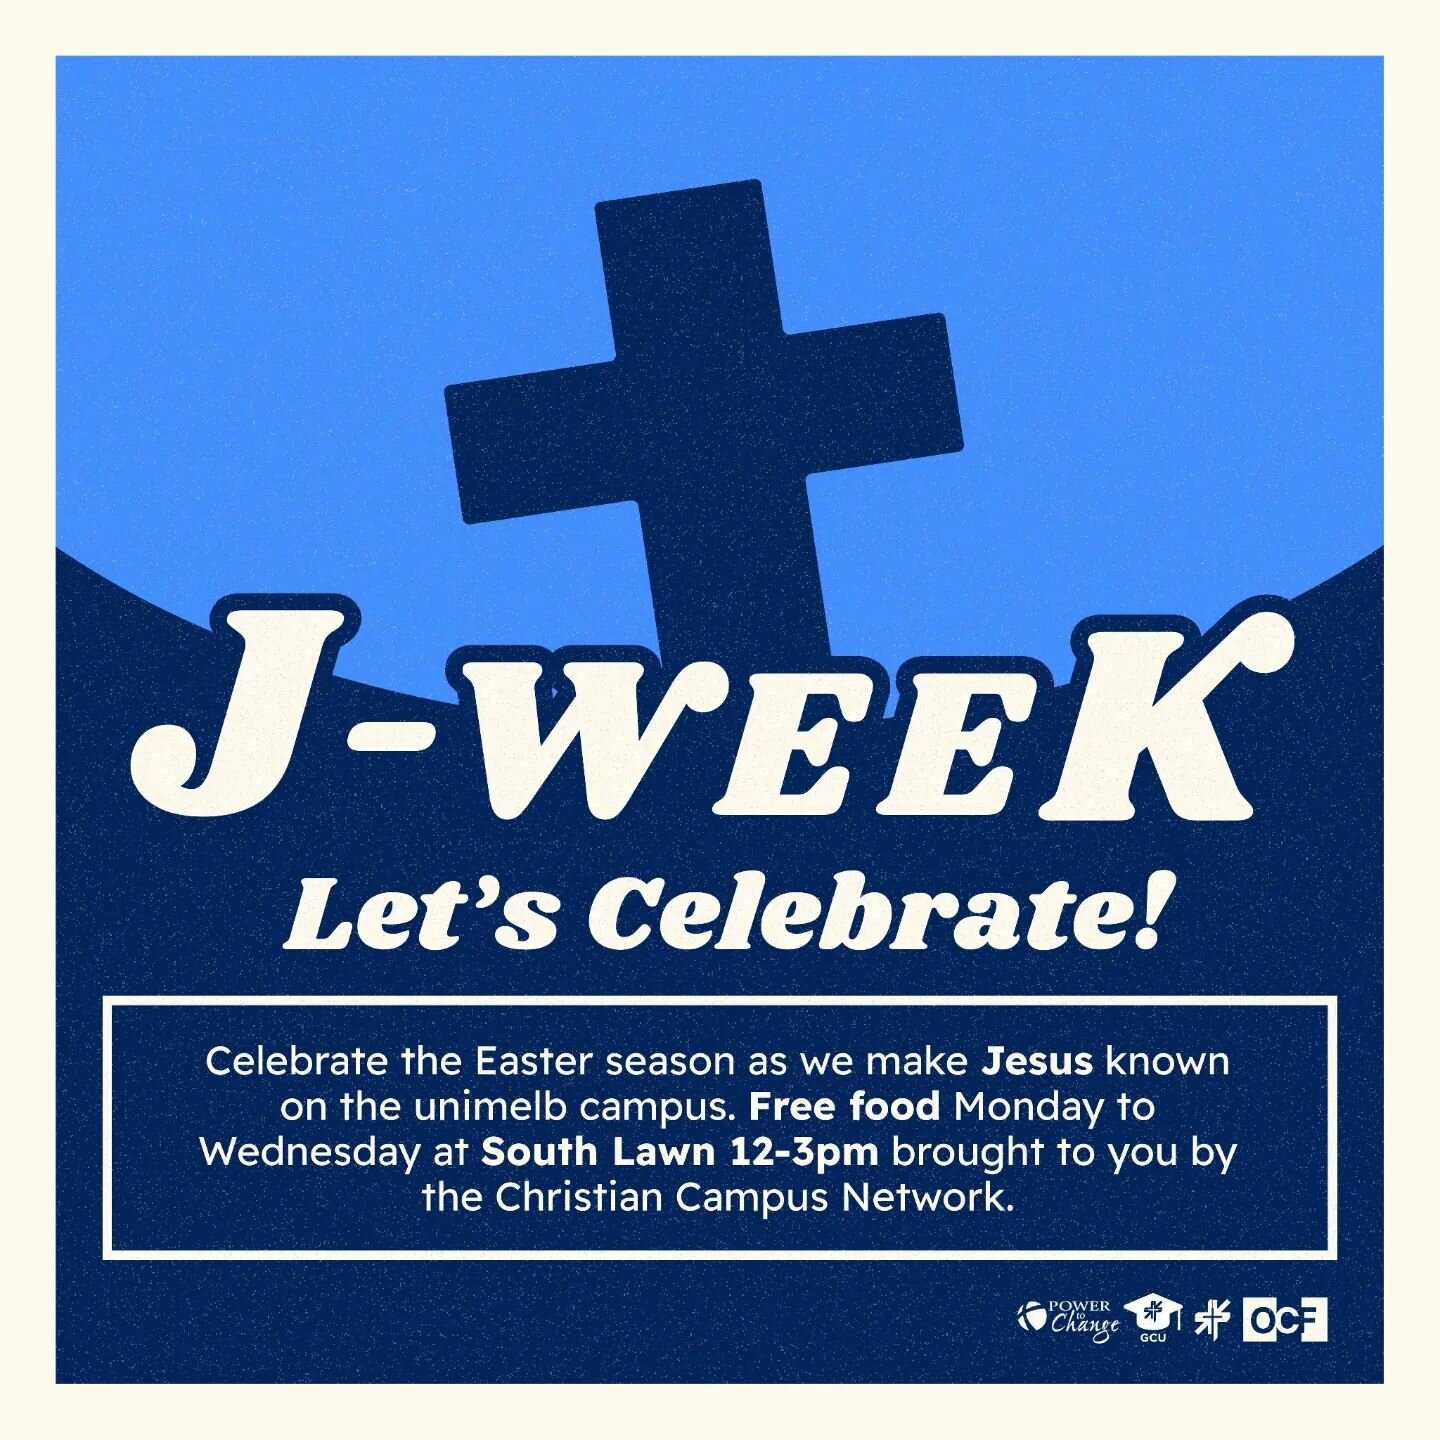 🙏 J-WEEK 💠

What could be a more fitting occasion to share the message of making Jesus known than on J-Week? 🙌

Come and join us as celebrate Jesus from Monday to Wednesday 🥰